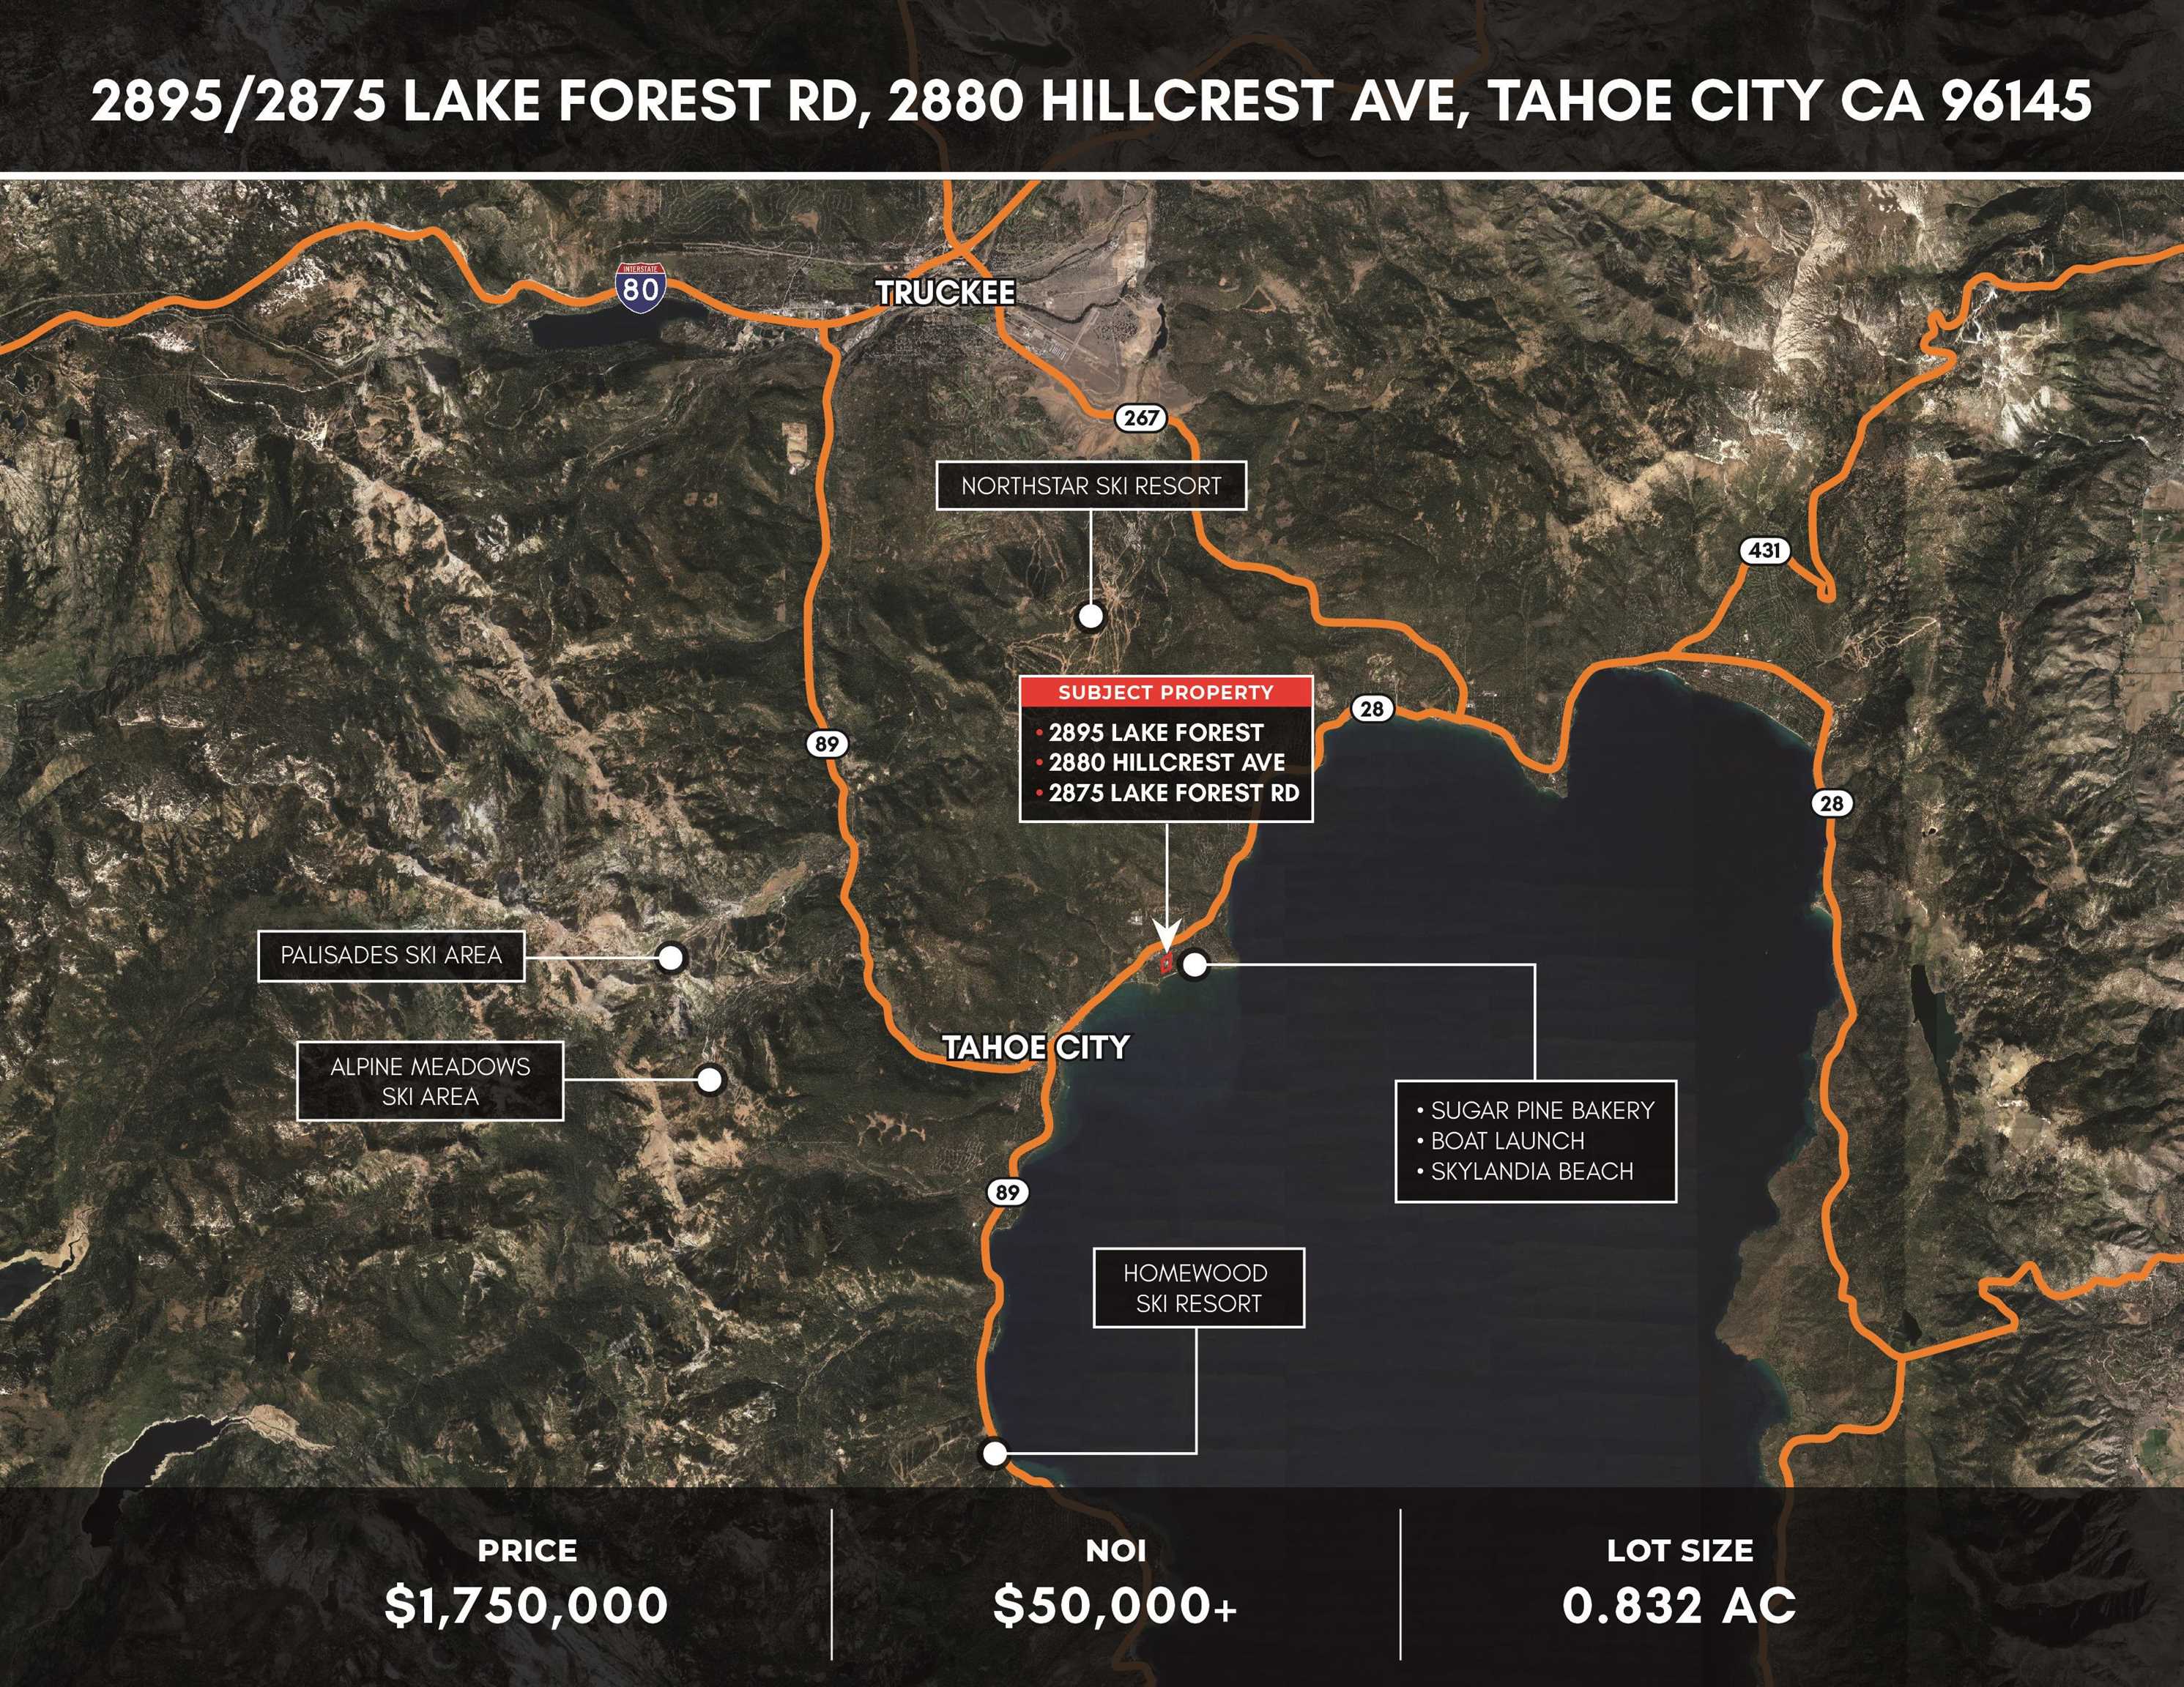 2895/2875 Lake Forest Road, Tahoe City, CA 96145